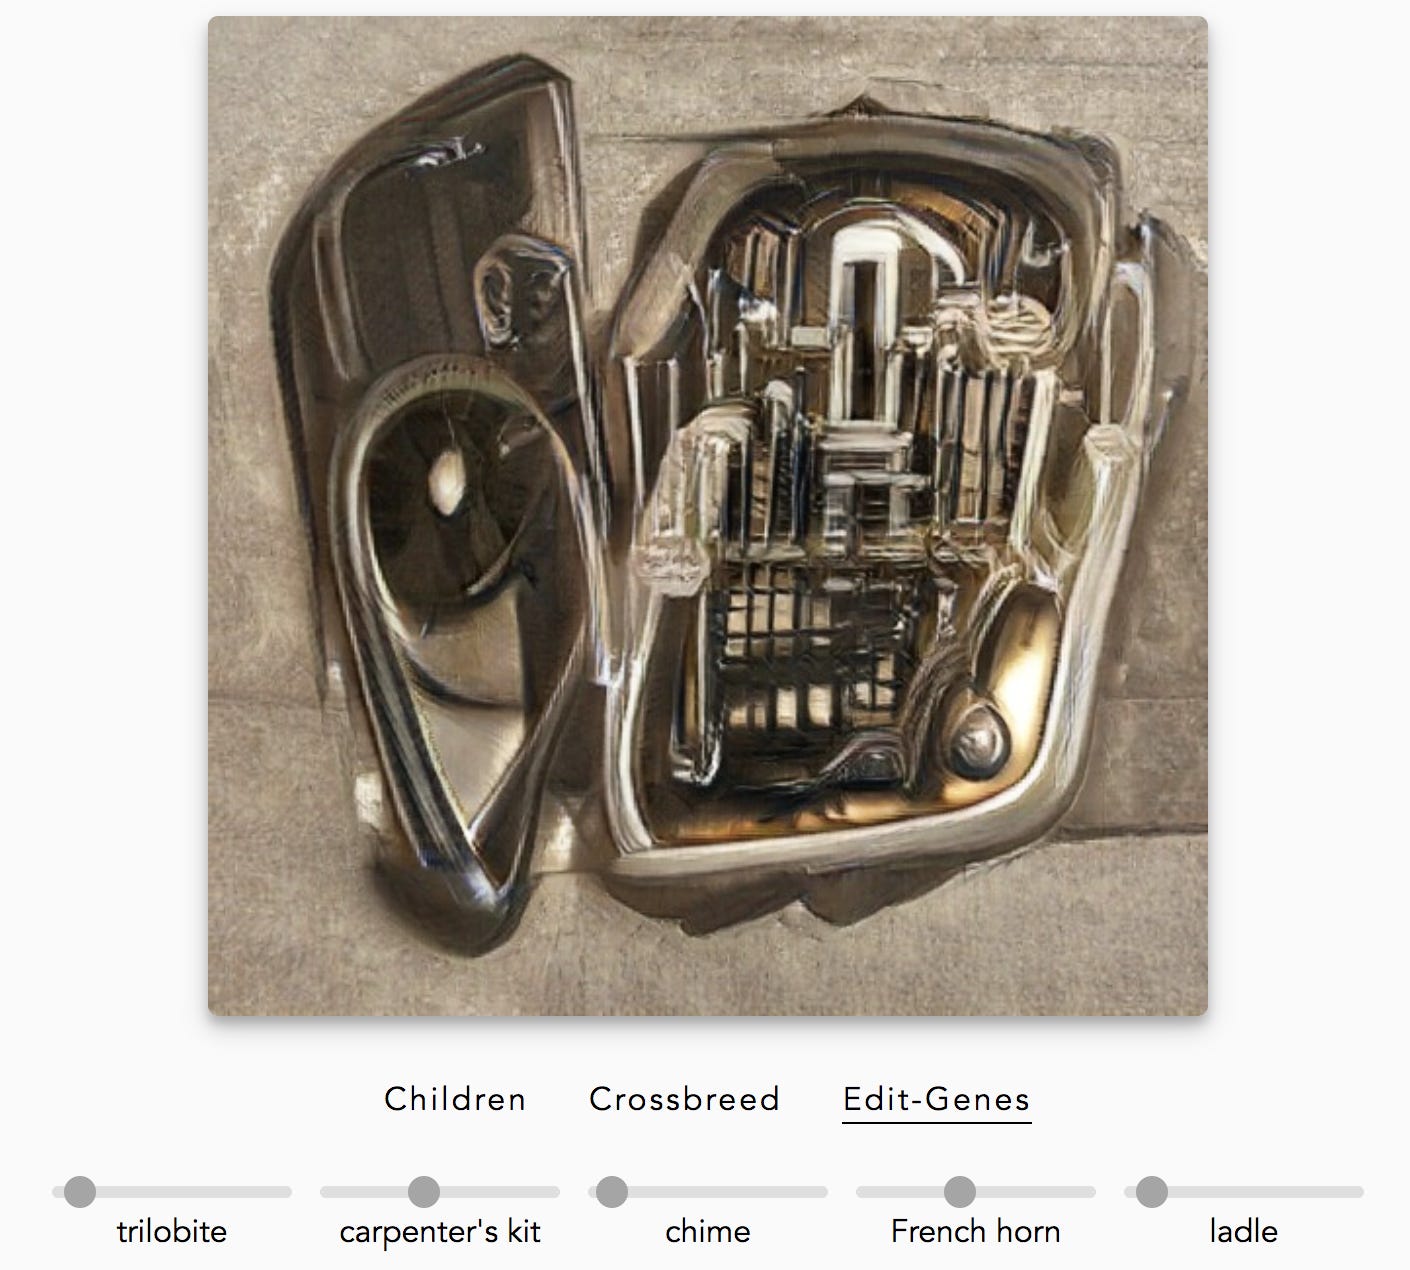 Looks like a french horn crossed with a city and a speaker